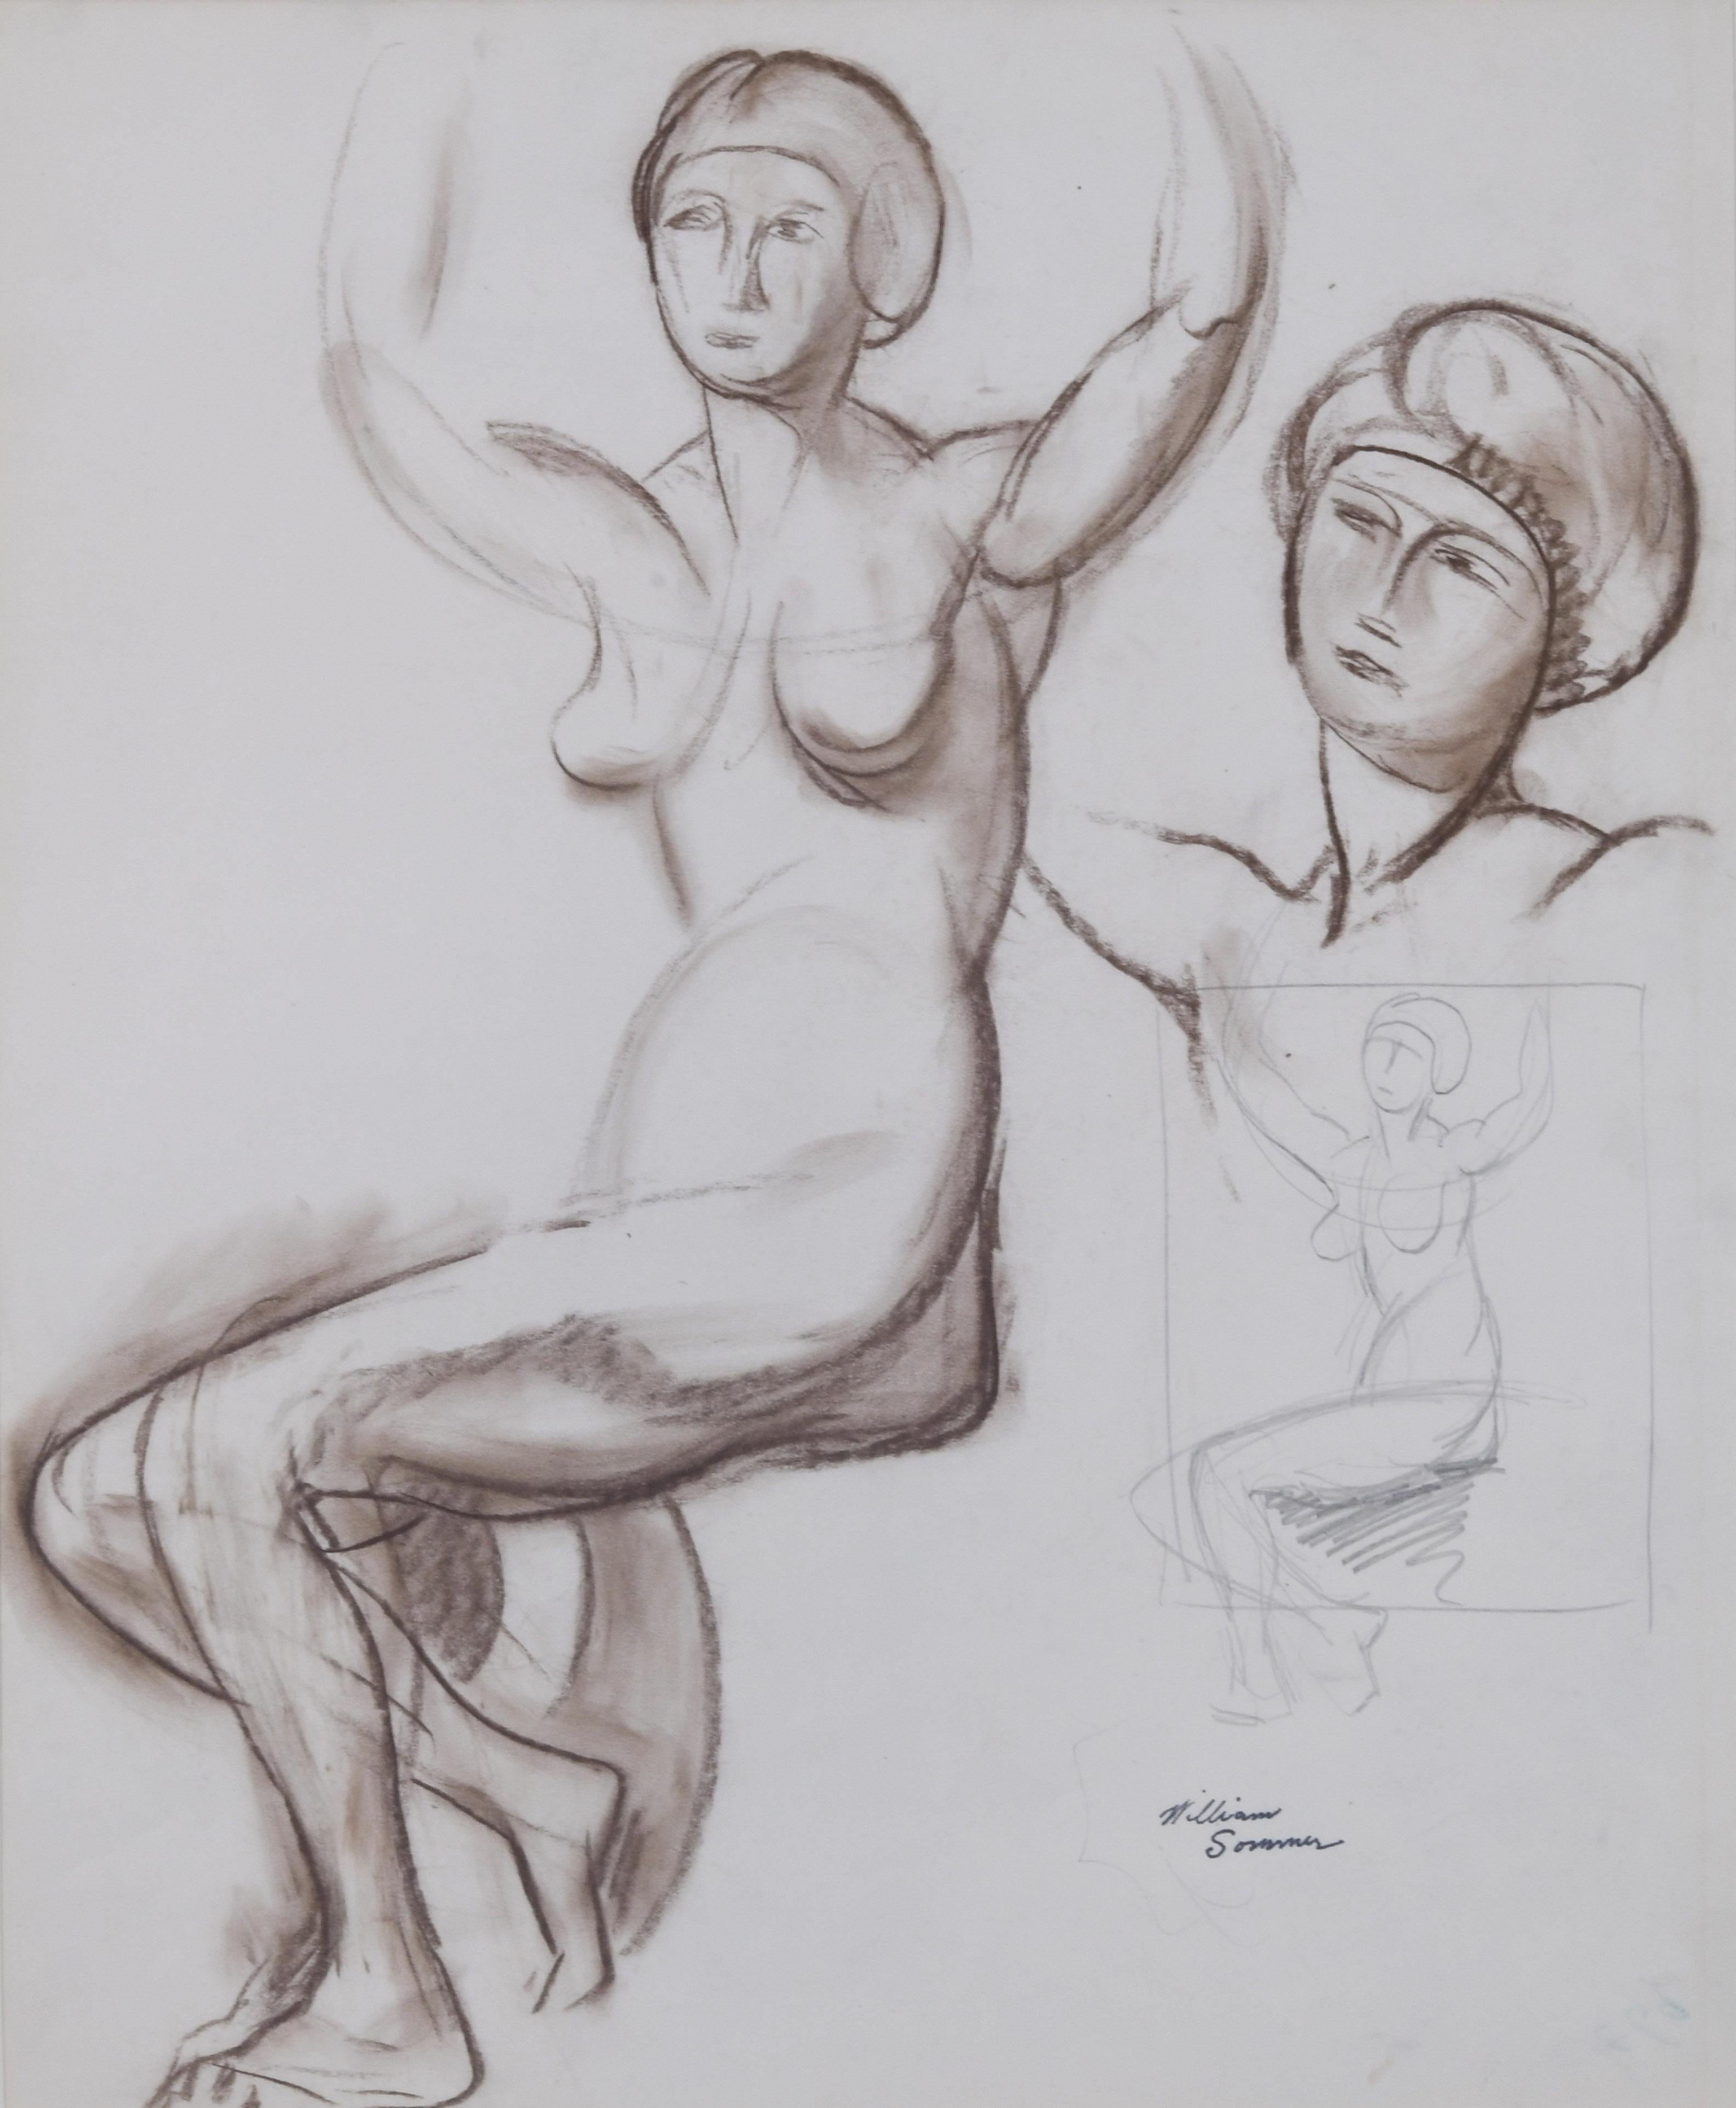 Female Nude Study - Art by William Sommer